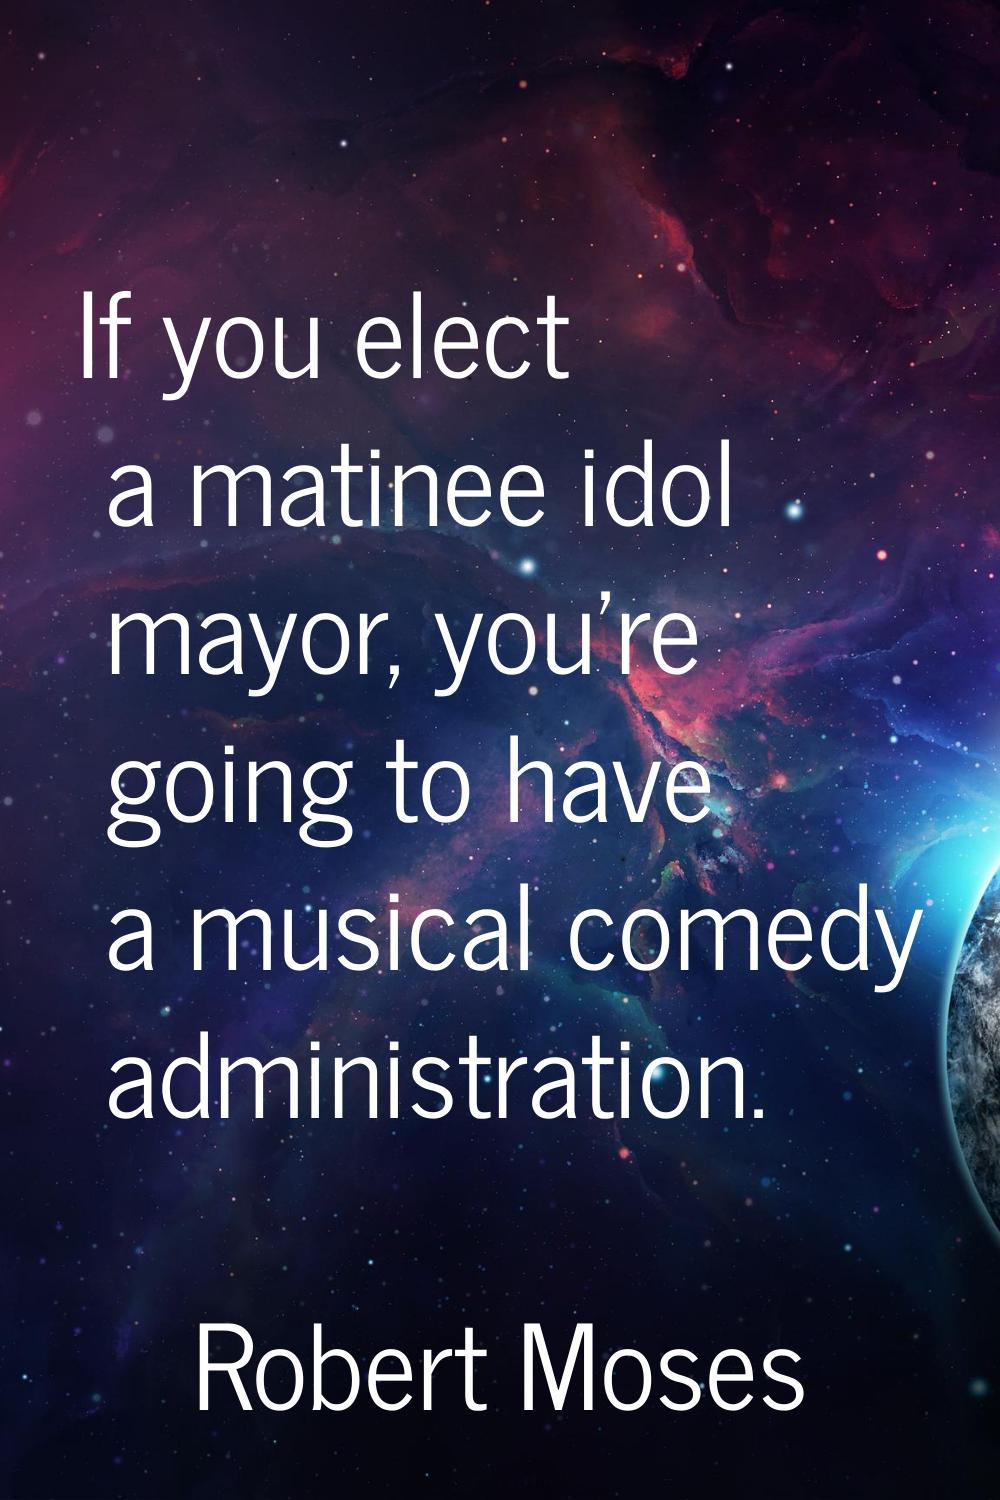 If you elect a matinee idol mayor, you're going to have a musical comedy administration.